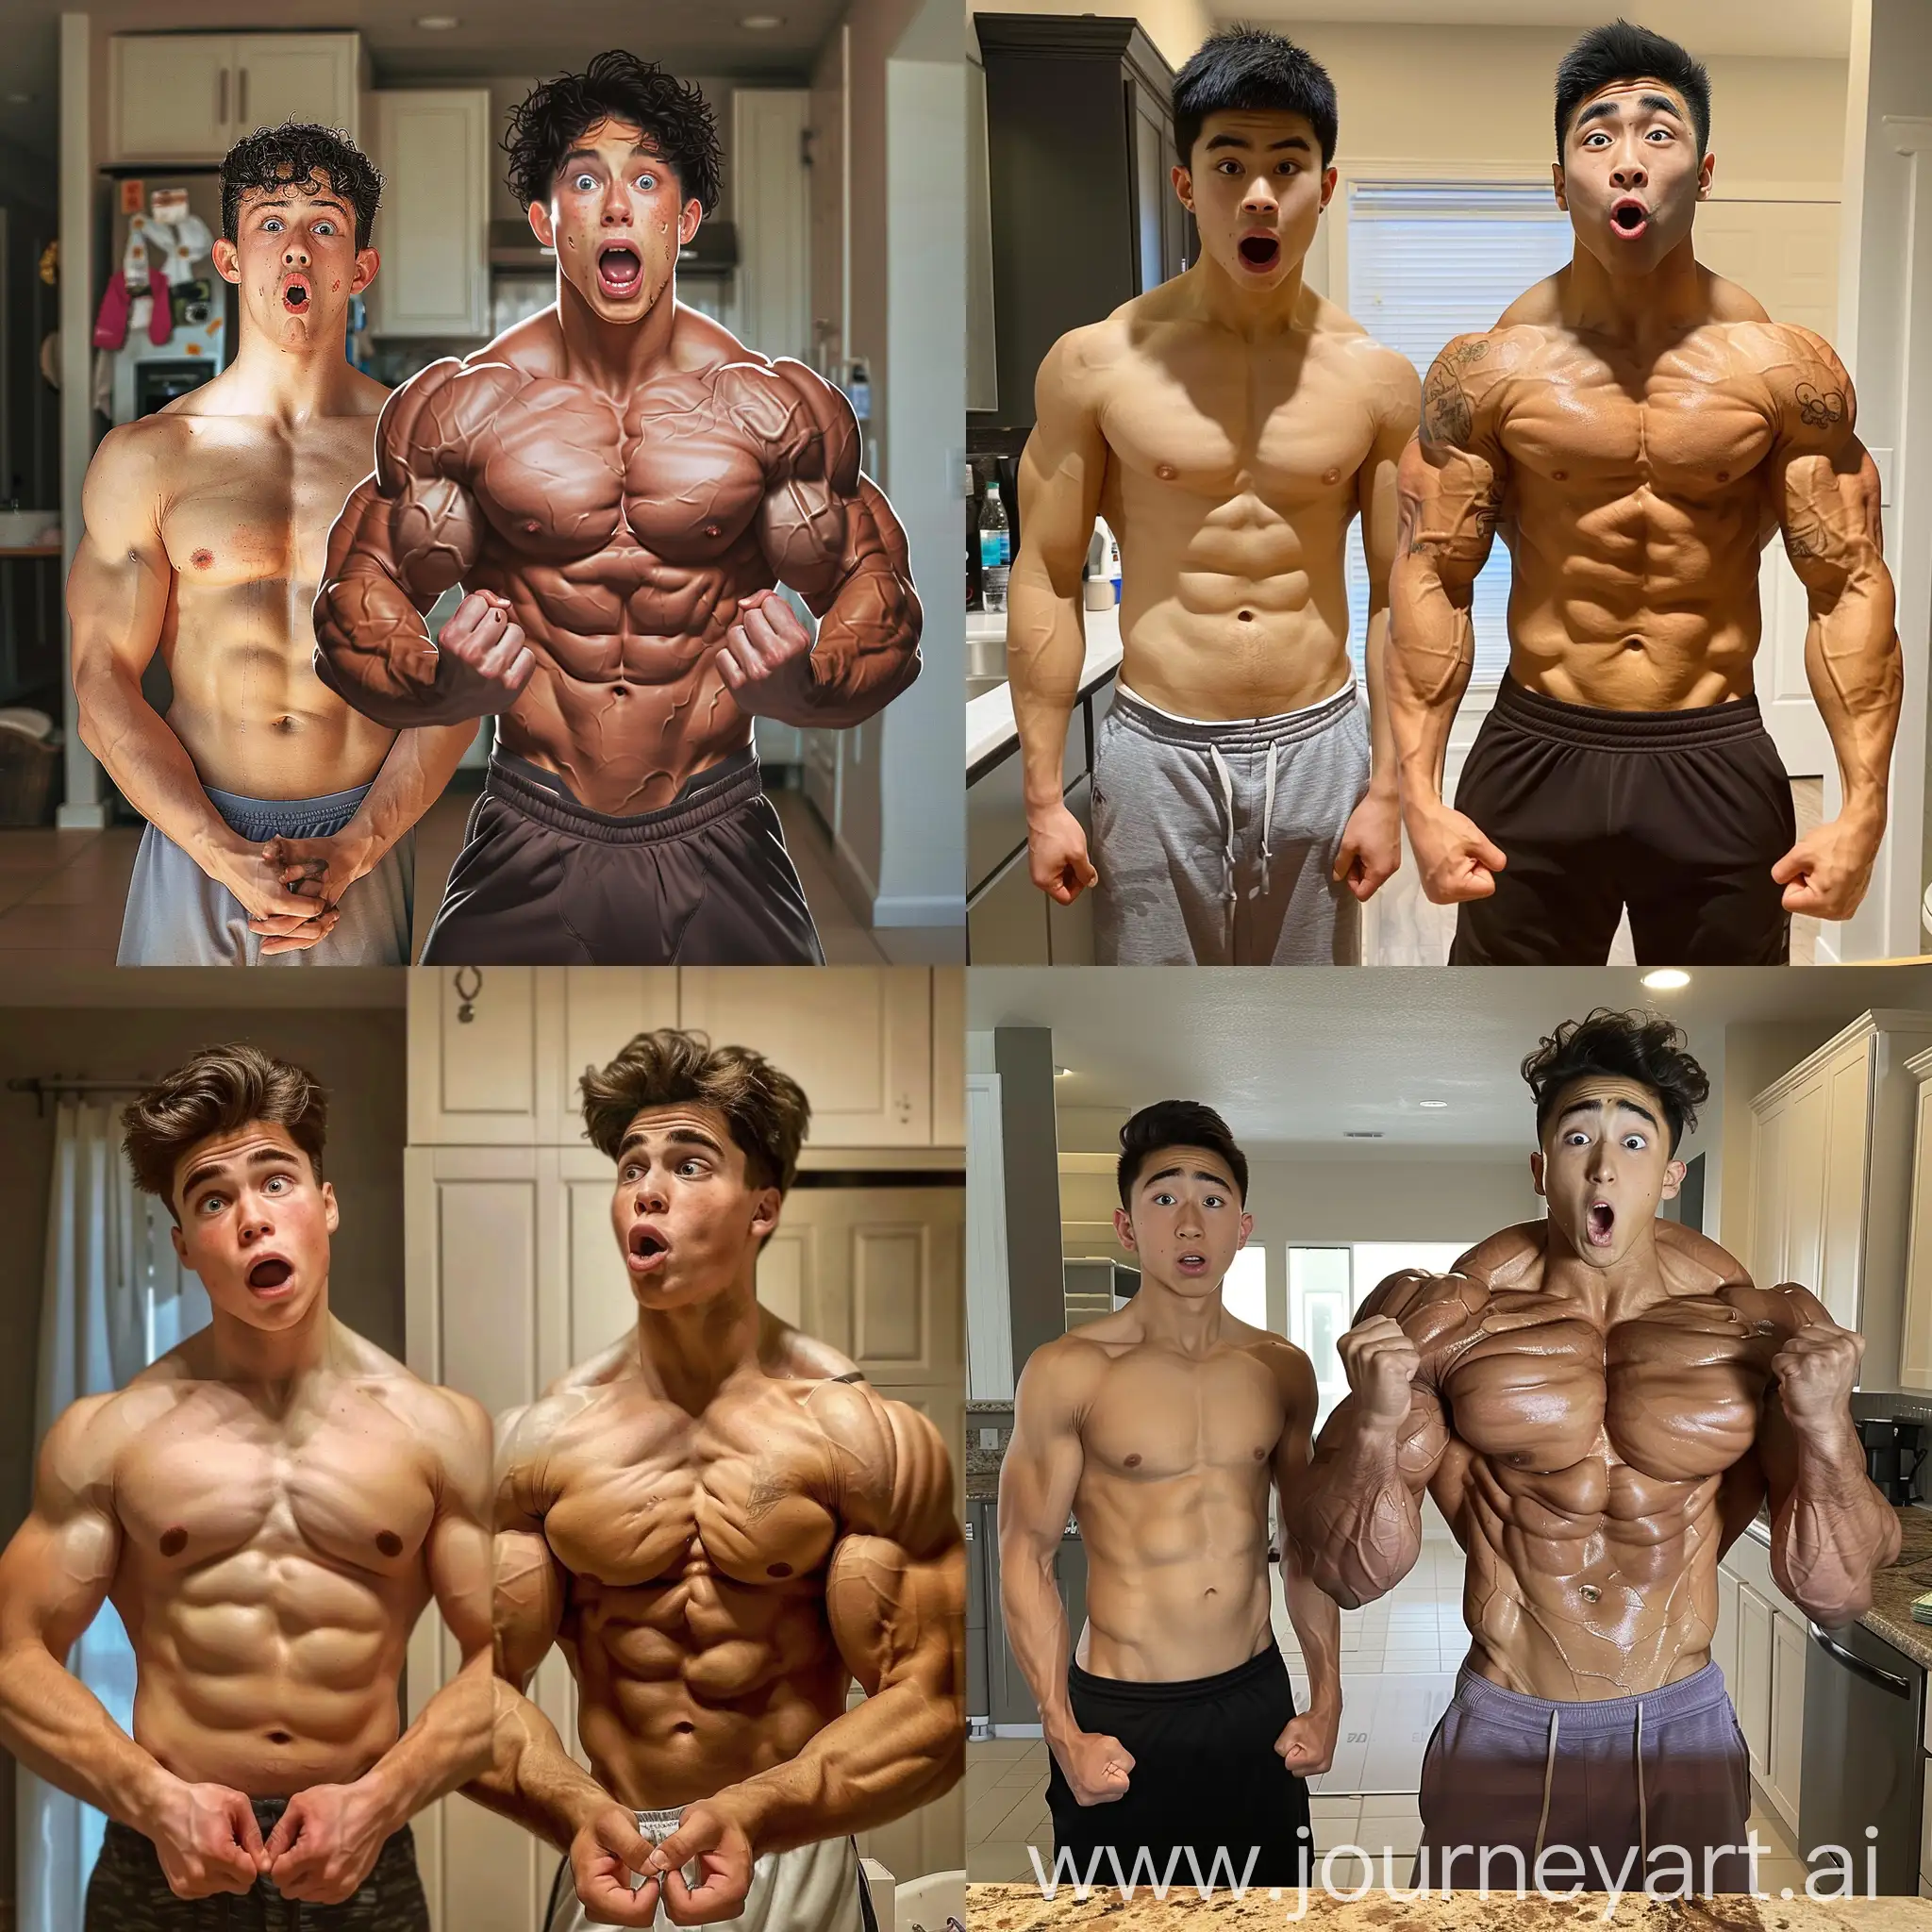 A picture of high school identical twin brothers. One is thin and unassuming, surprised at his brother’s transformation. The other has transformed into a fully grown pro bodybuilder and is in awe of his new physique, looking at his new muscles in wonder